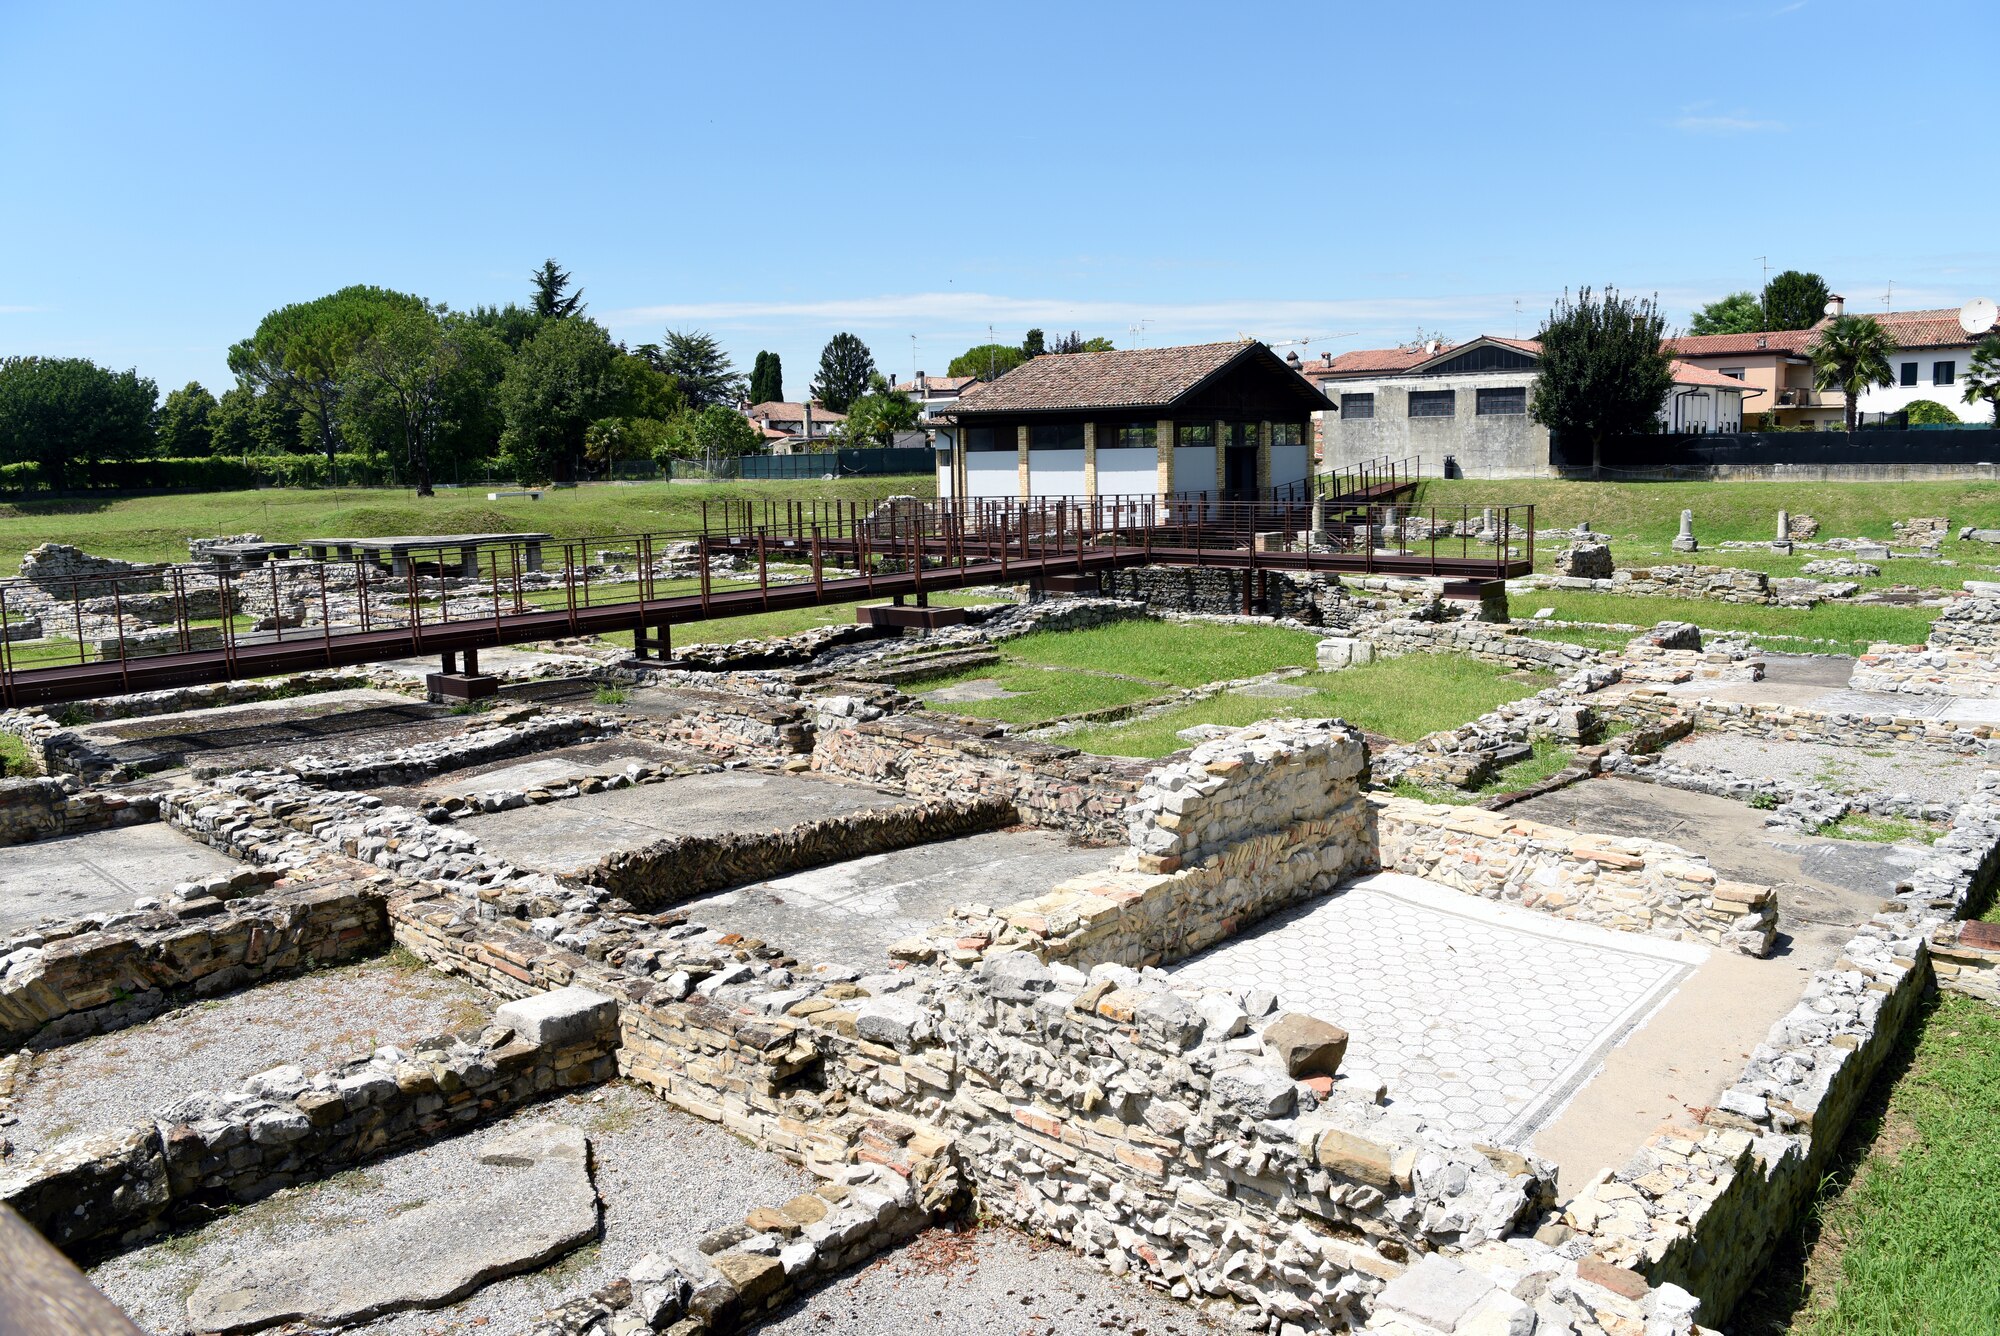 Ancient Roman houses and oratory at Aquileia, Italy, July 15, 2020. Aquileia was founded by the Romans in 181 BC along the Natiso River. (U.S. Air Force photo by Staff Sgt. Heidi Goodsell)